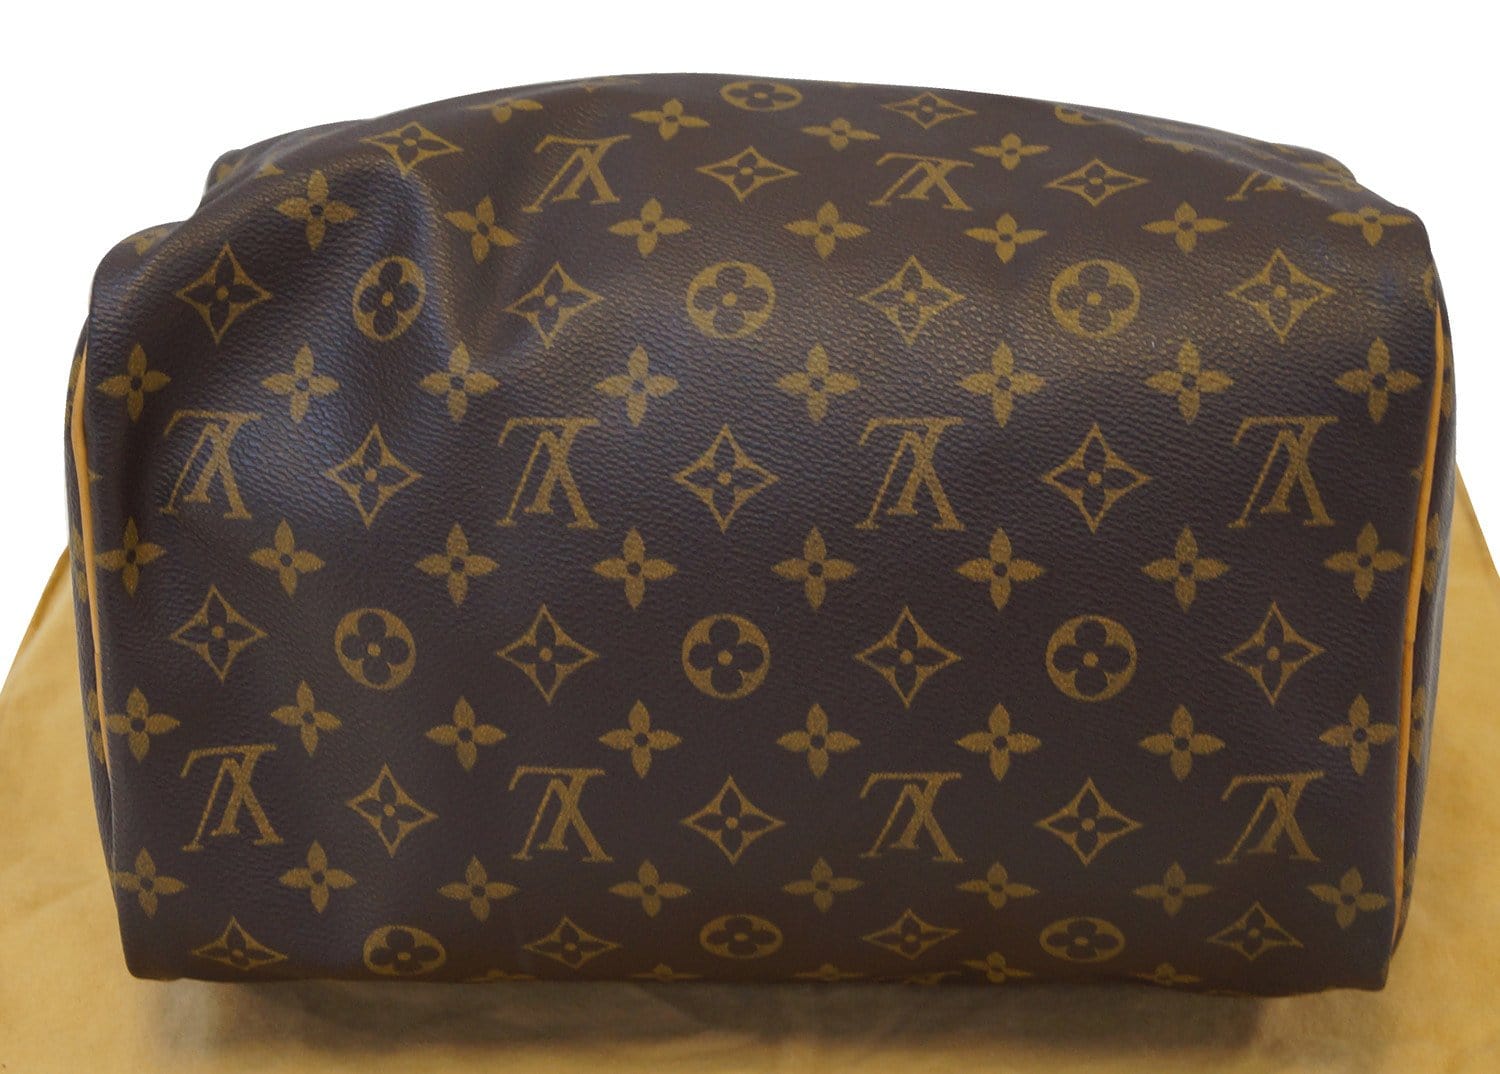 A Guide to Authenticating the Louis Vuitton Monogram Speedy Sizes 30-40  (Authenticating Louis Vuitton) See more